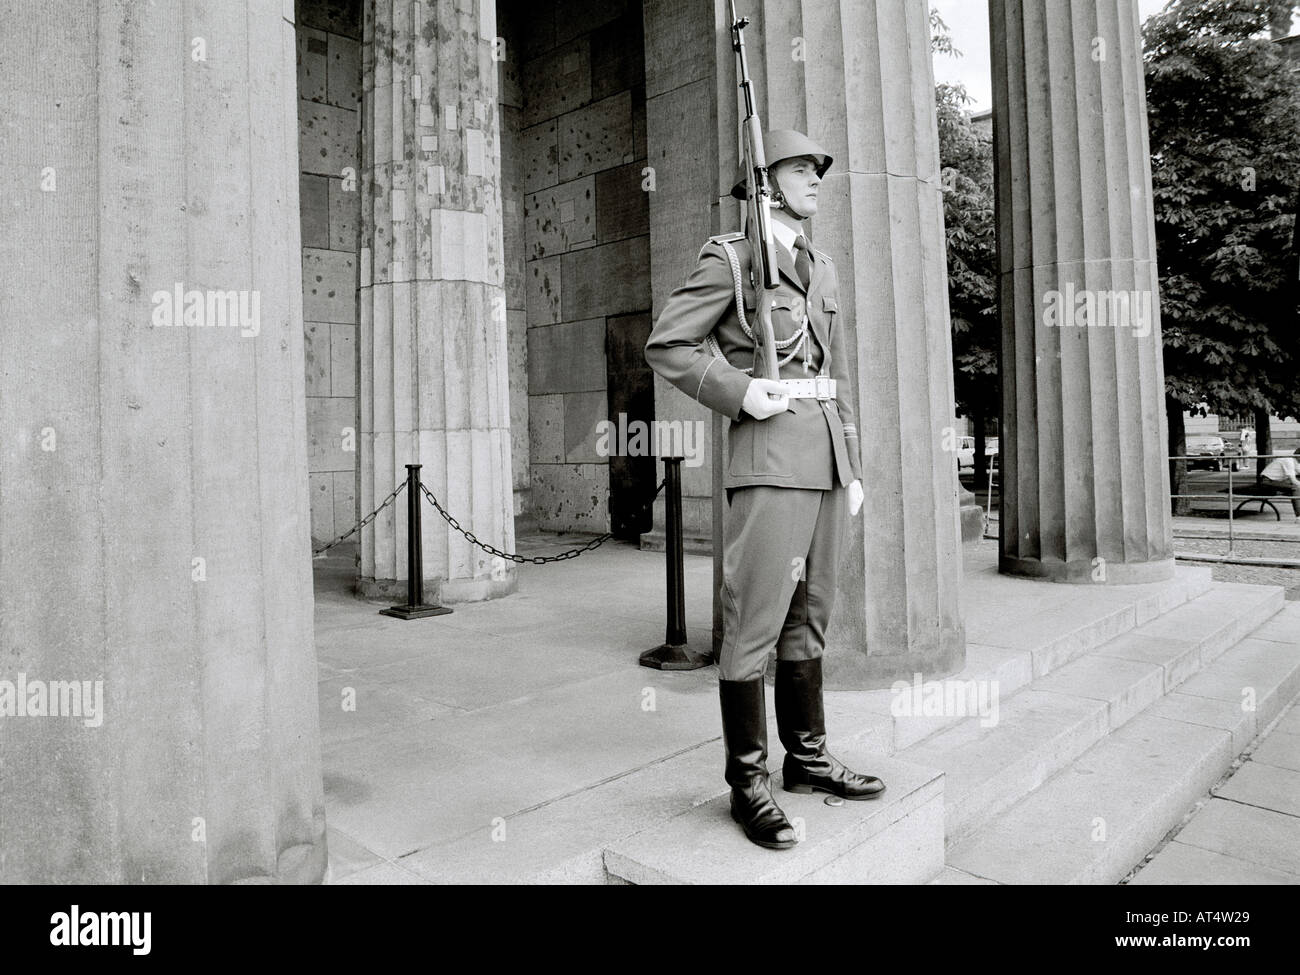 New Guardhouse Neue Wache in the Cold War in Unter Den Linden in East Berlin in Germany in Europe. History Historical Soldier Memorial Travel Stock Photo